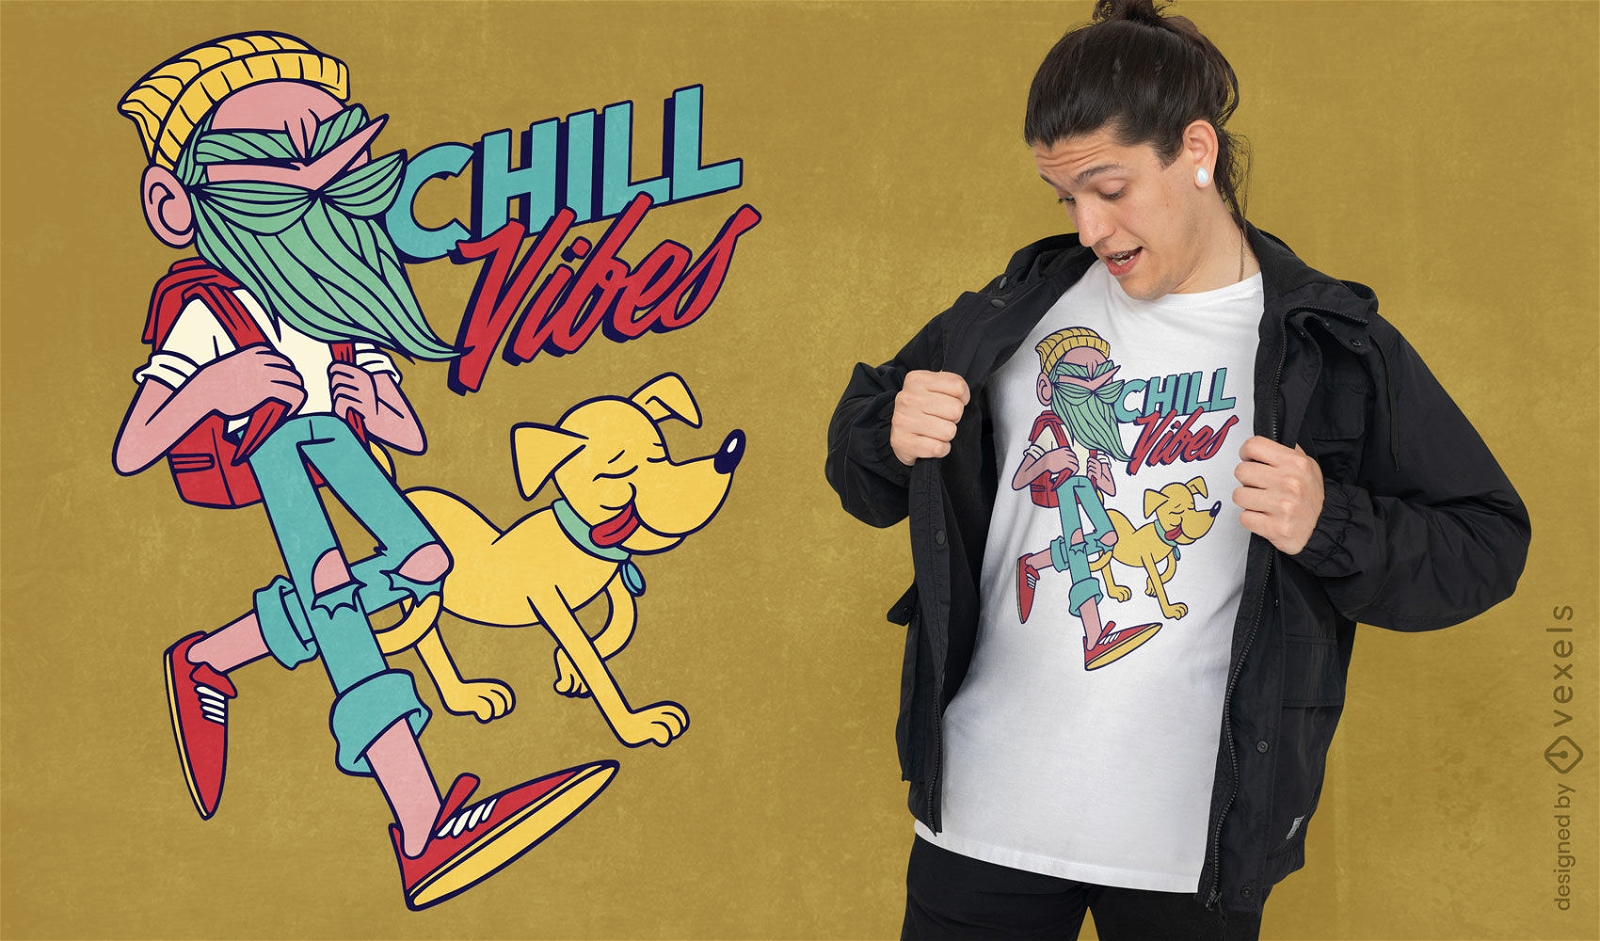 Chill hipster character and dog t-shirt design